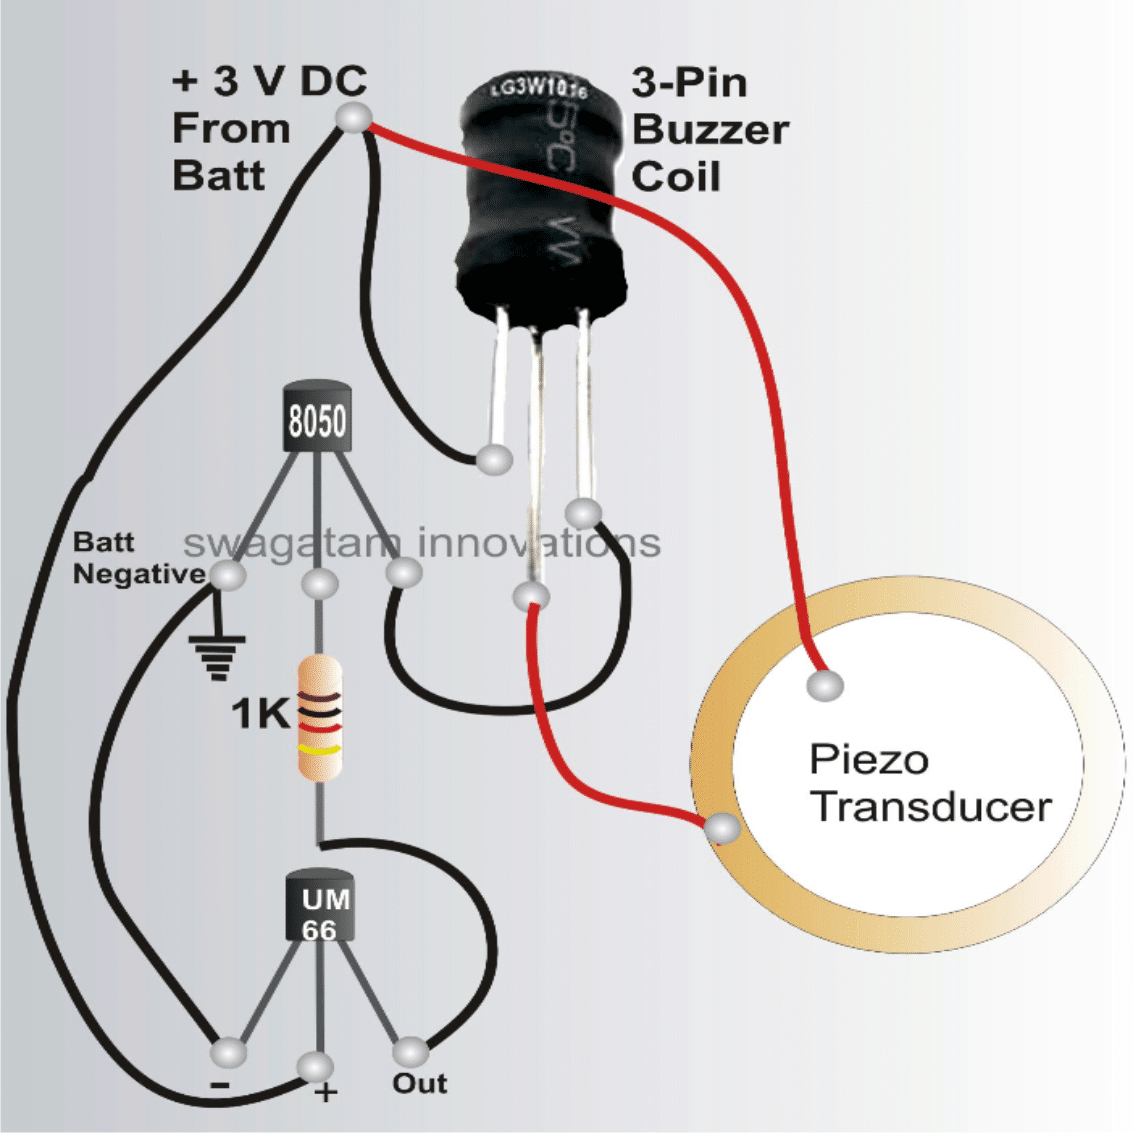 bicycle musical horn circuit using 27mm piezo transducer and UM66 tone generator